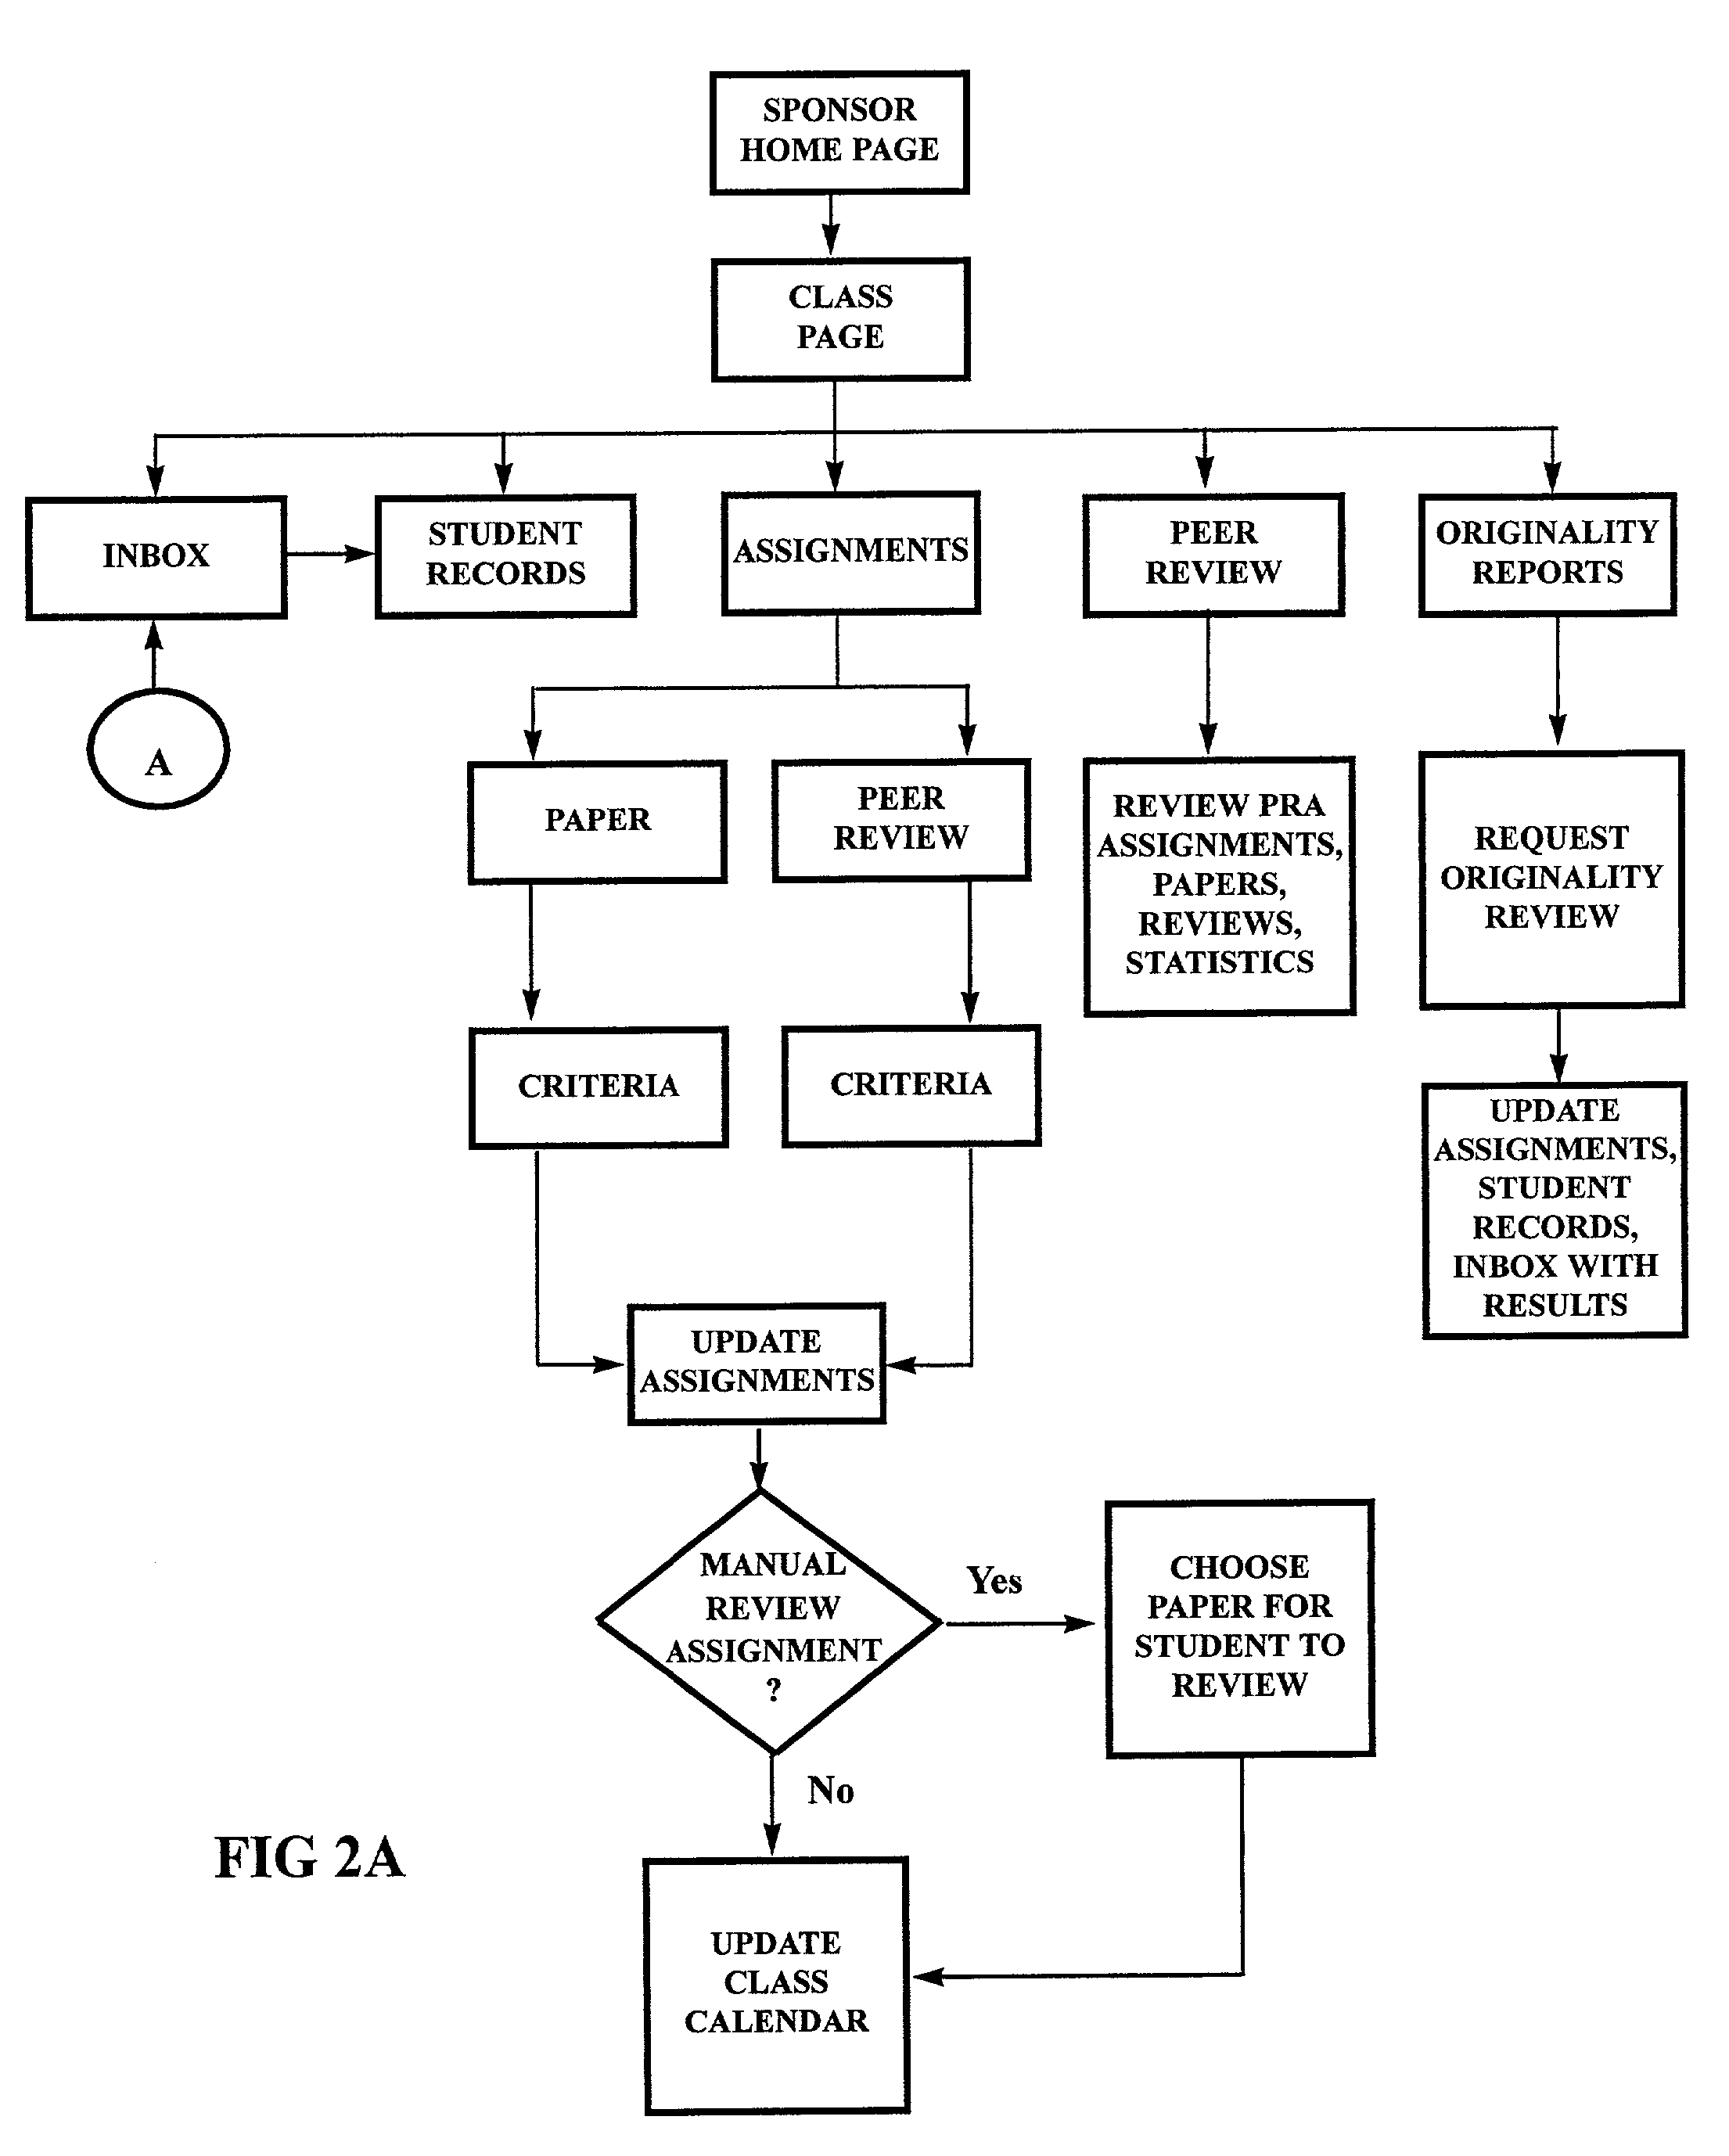 Systems and methods for conducting a peer review process and evaluating the originality of documents